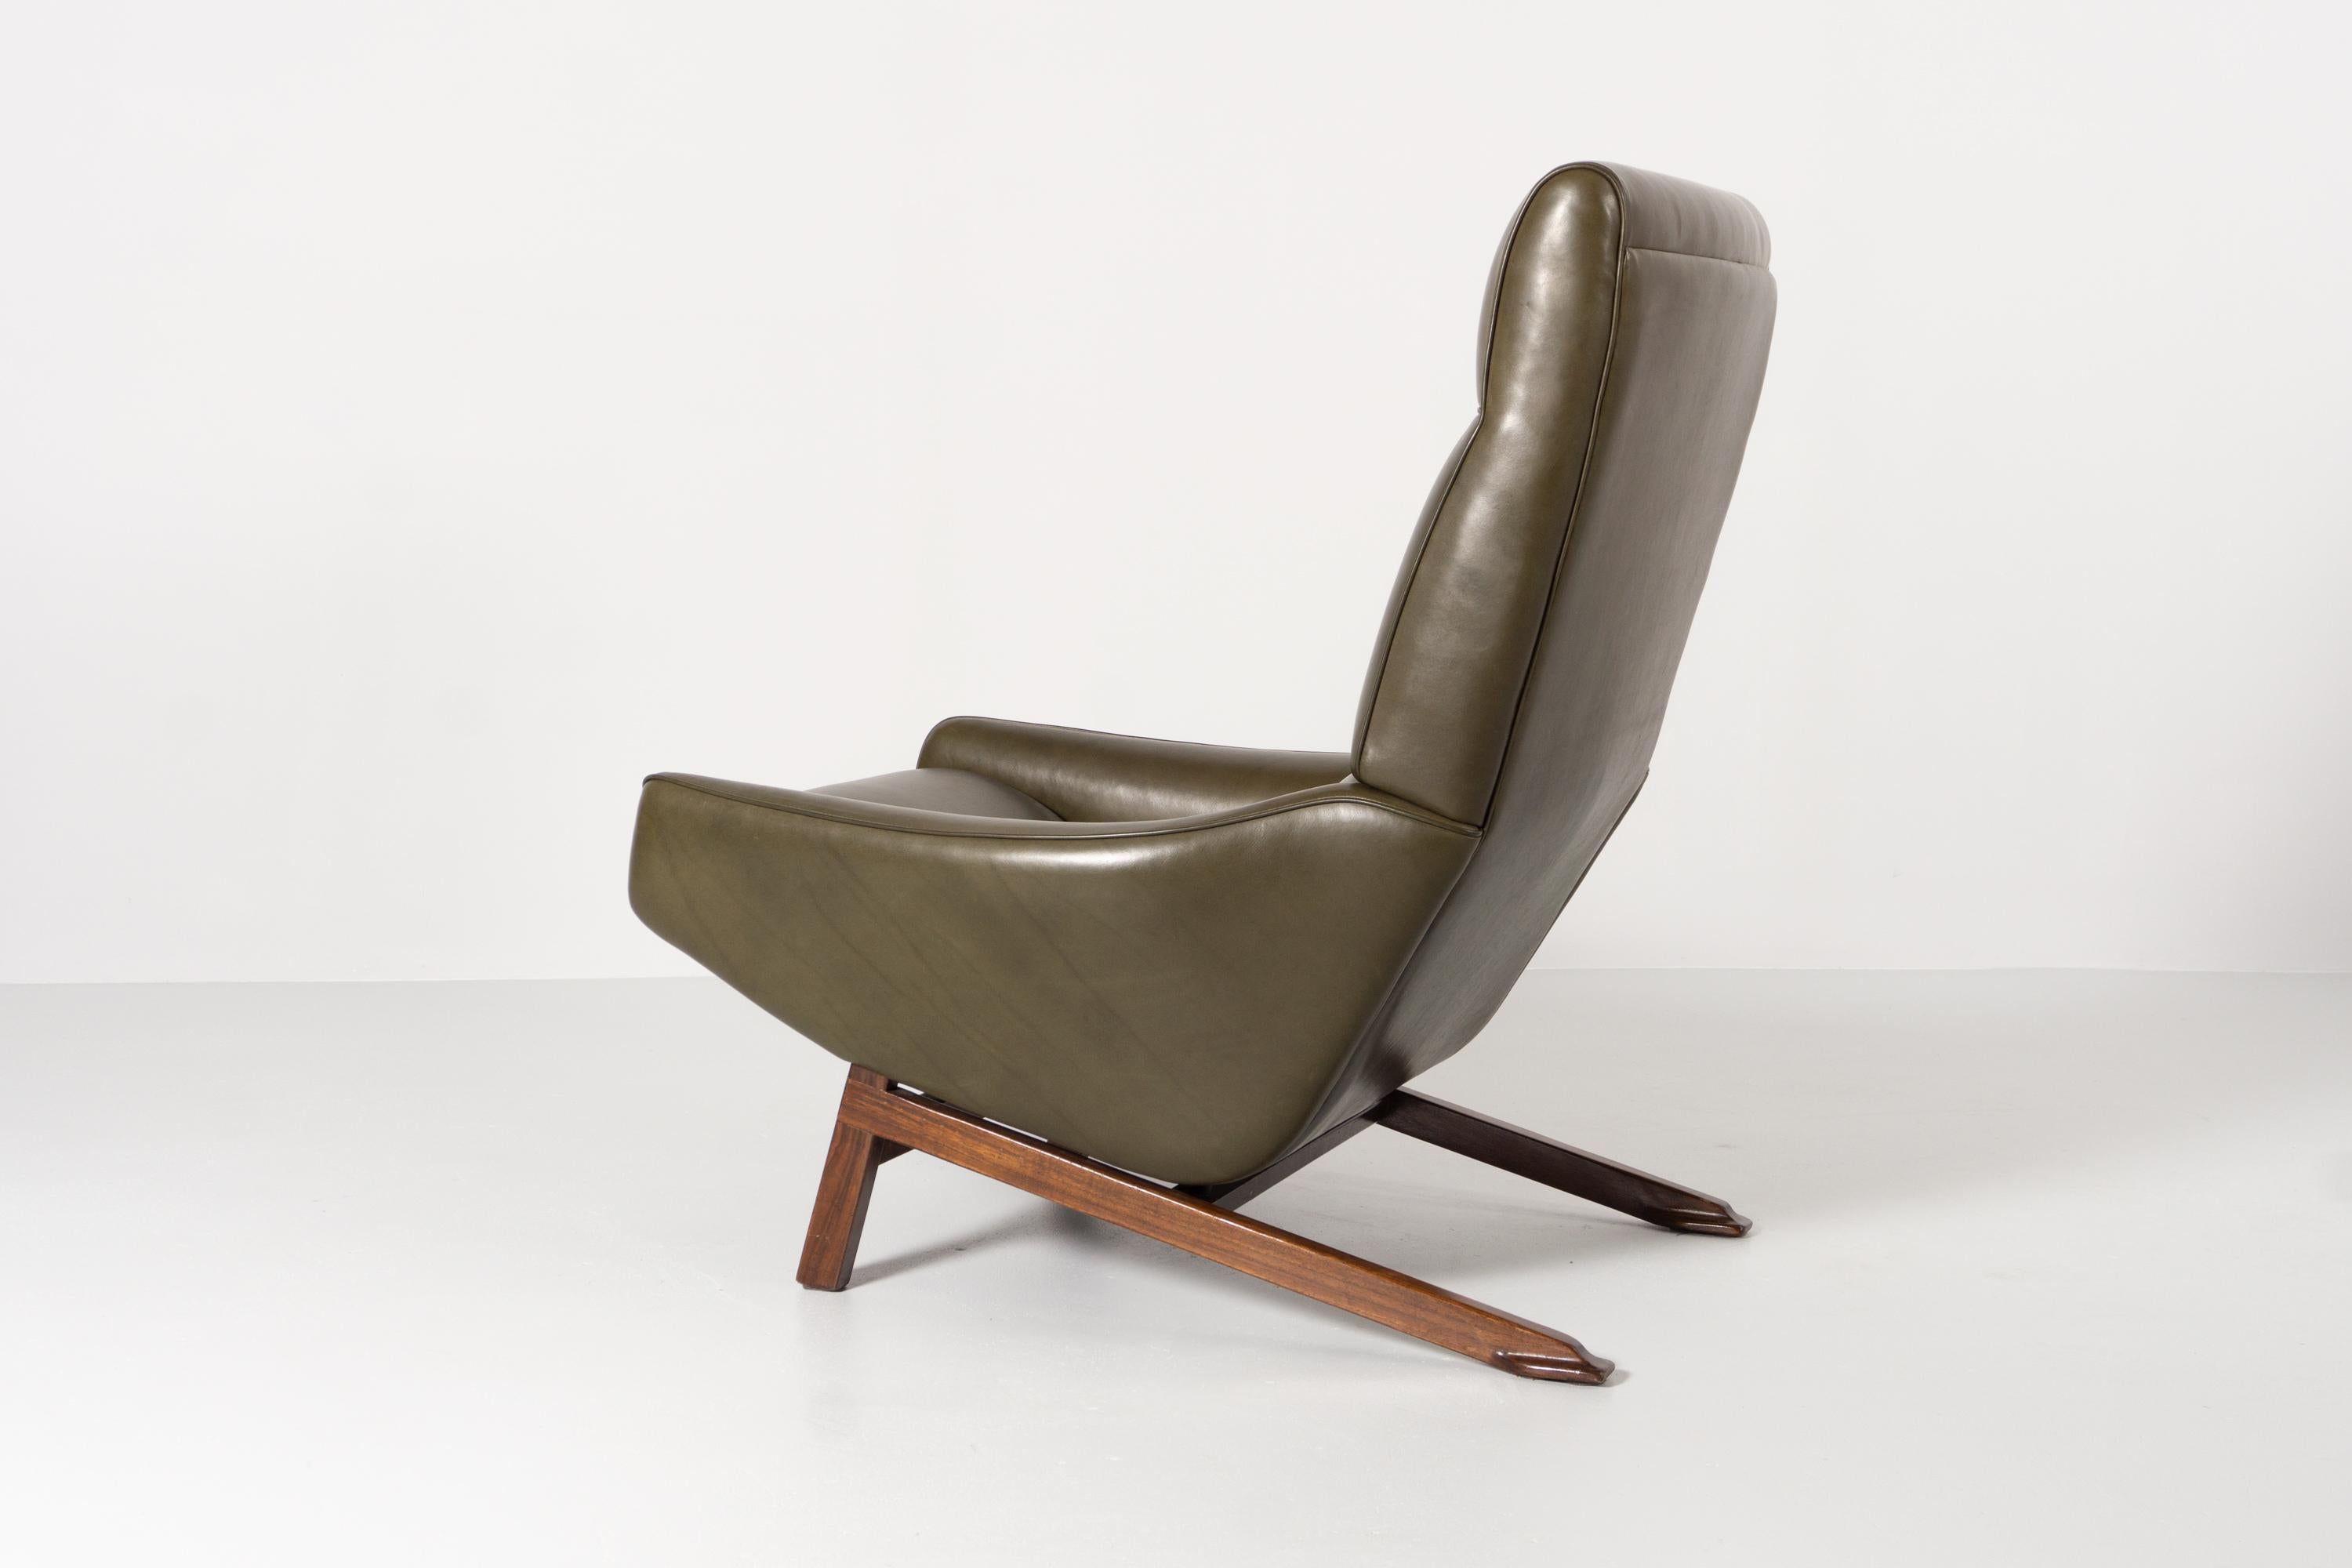 Mid-Century Modern Armchair Designed by Gianfranco Frattini 1960 Model '880' For Sale